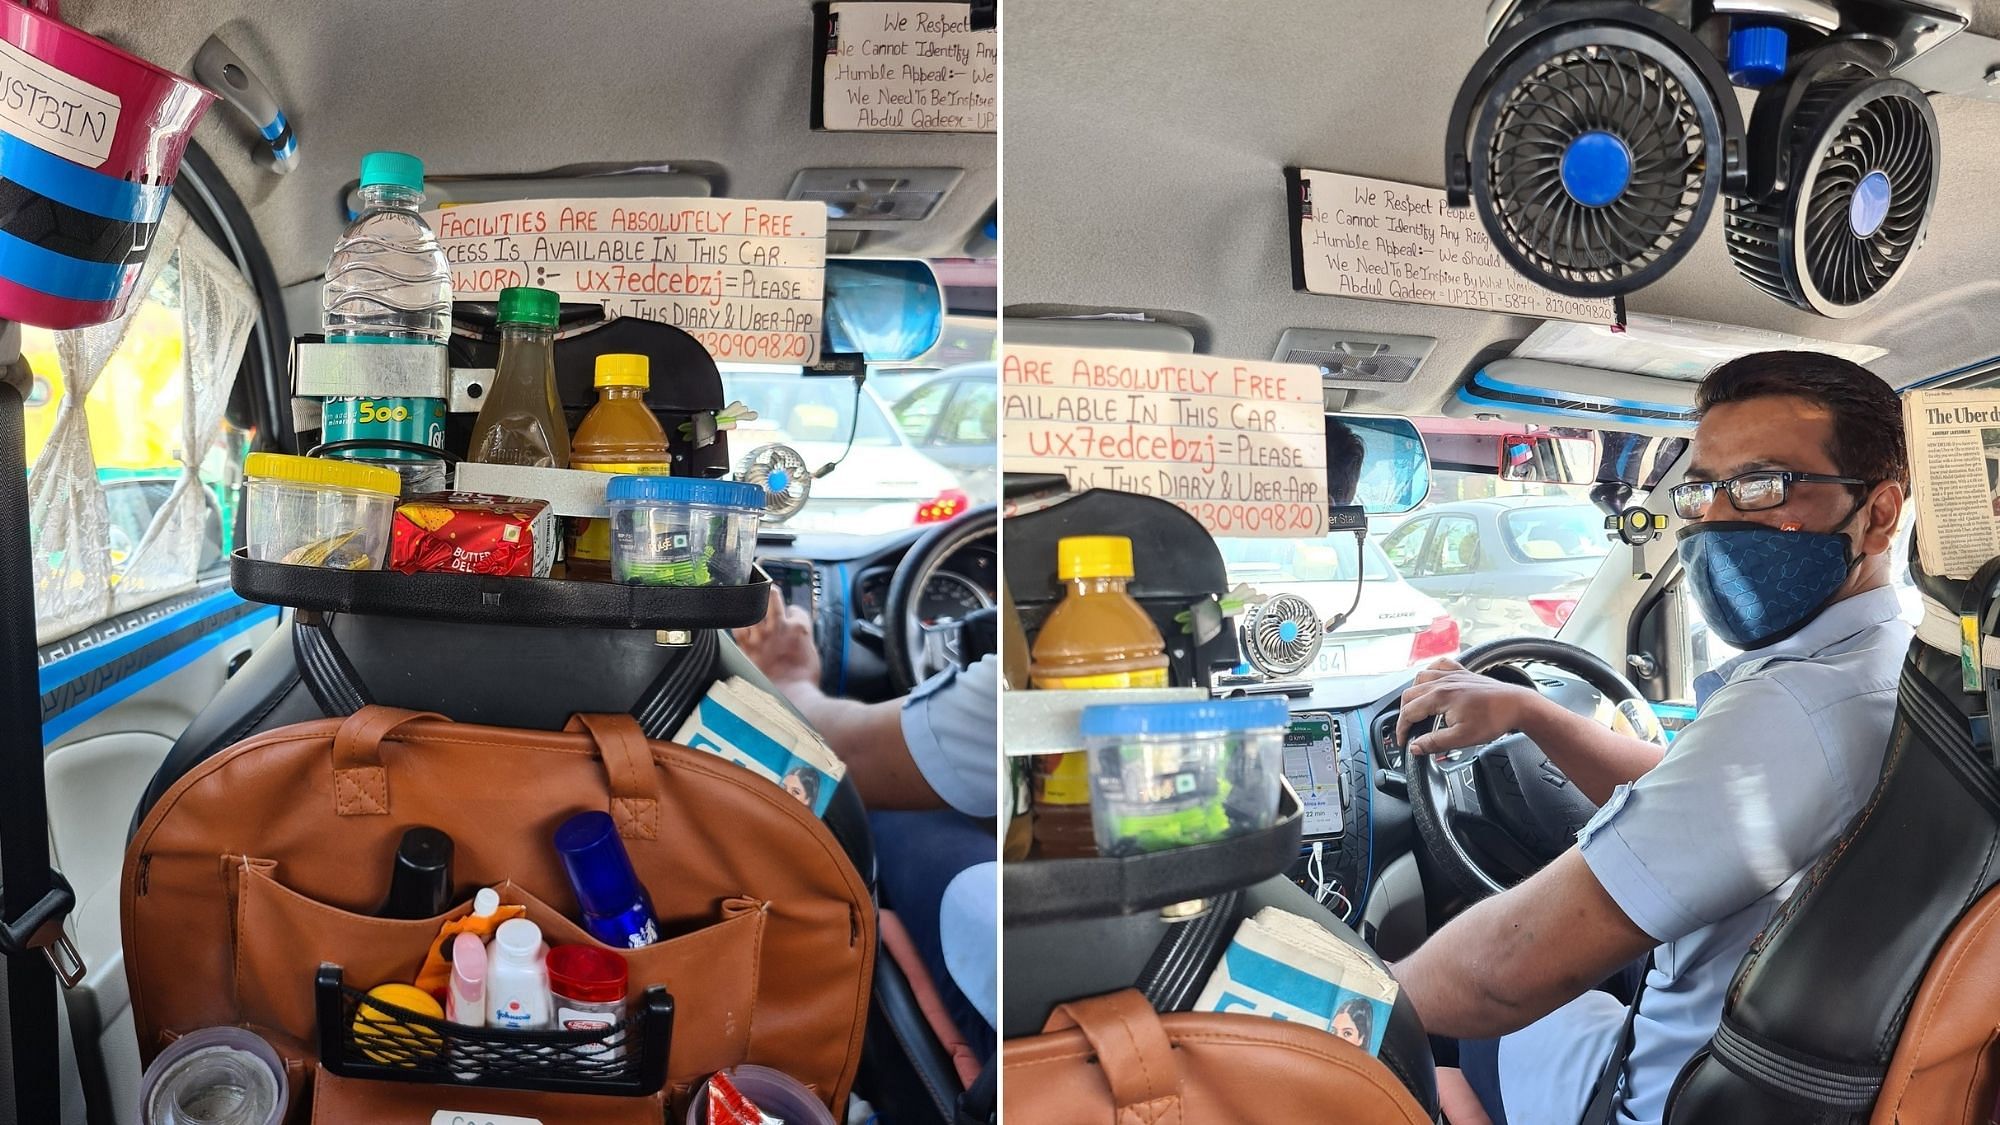 Uber Driver's Cab Has Sanitizer, Snacks & Messages on 'Humanity'